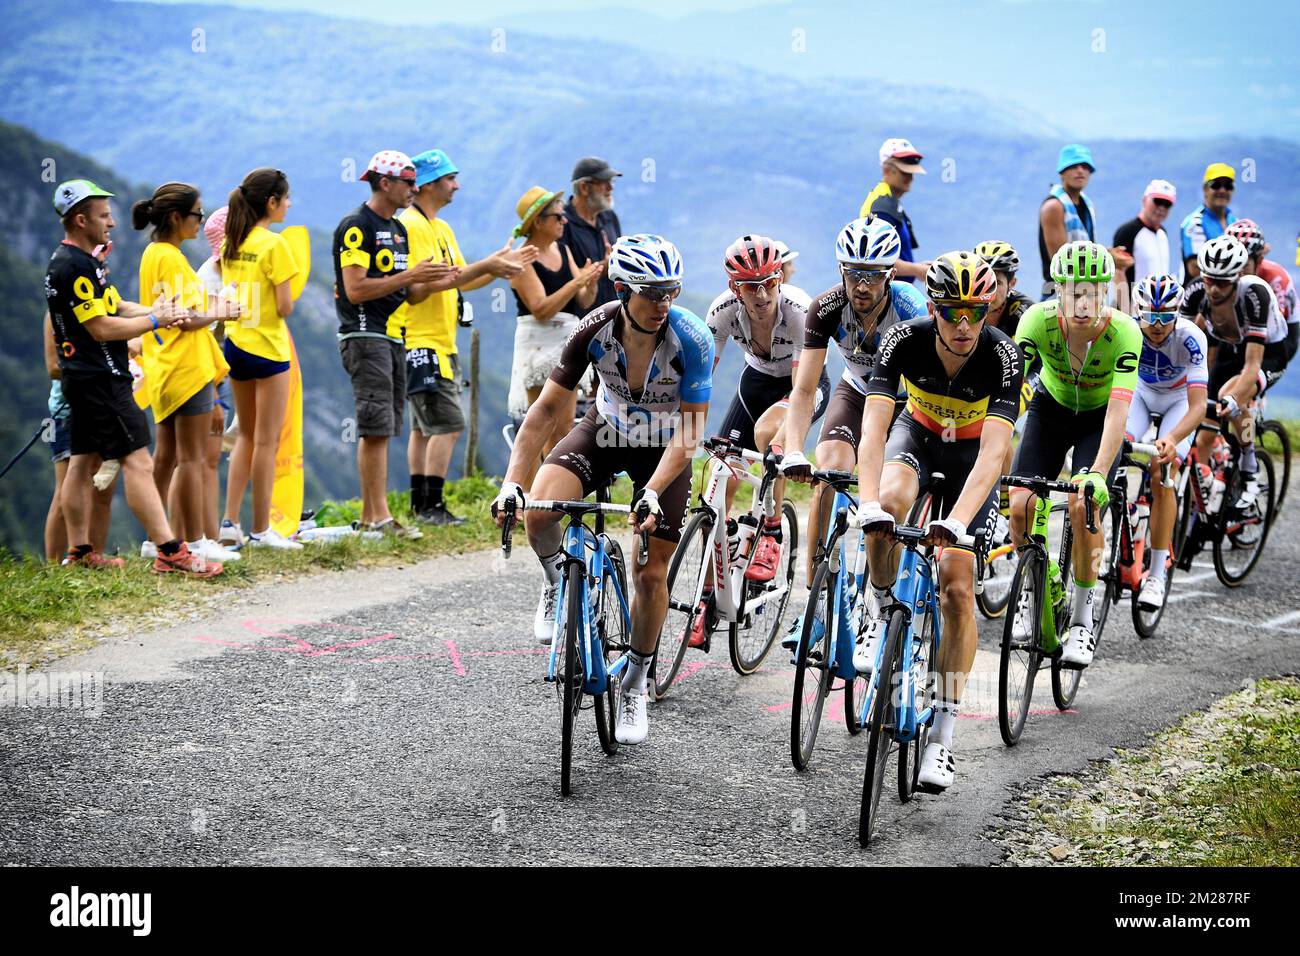 Belgian Oliver Naesen of AG2R La Mondiale pictured in action during the eighth stage of the 104th edition of the Tour de France cycling race, 187,5km from Dole to Station des Rousses, France, Saturday 08 July 2017. This year's Tour de France takes place from July first to July 23rd. BELGA PHOTO YORICK JANSENS Stock Photo